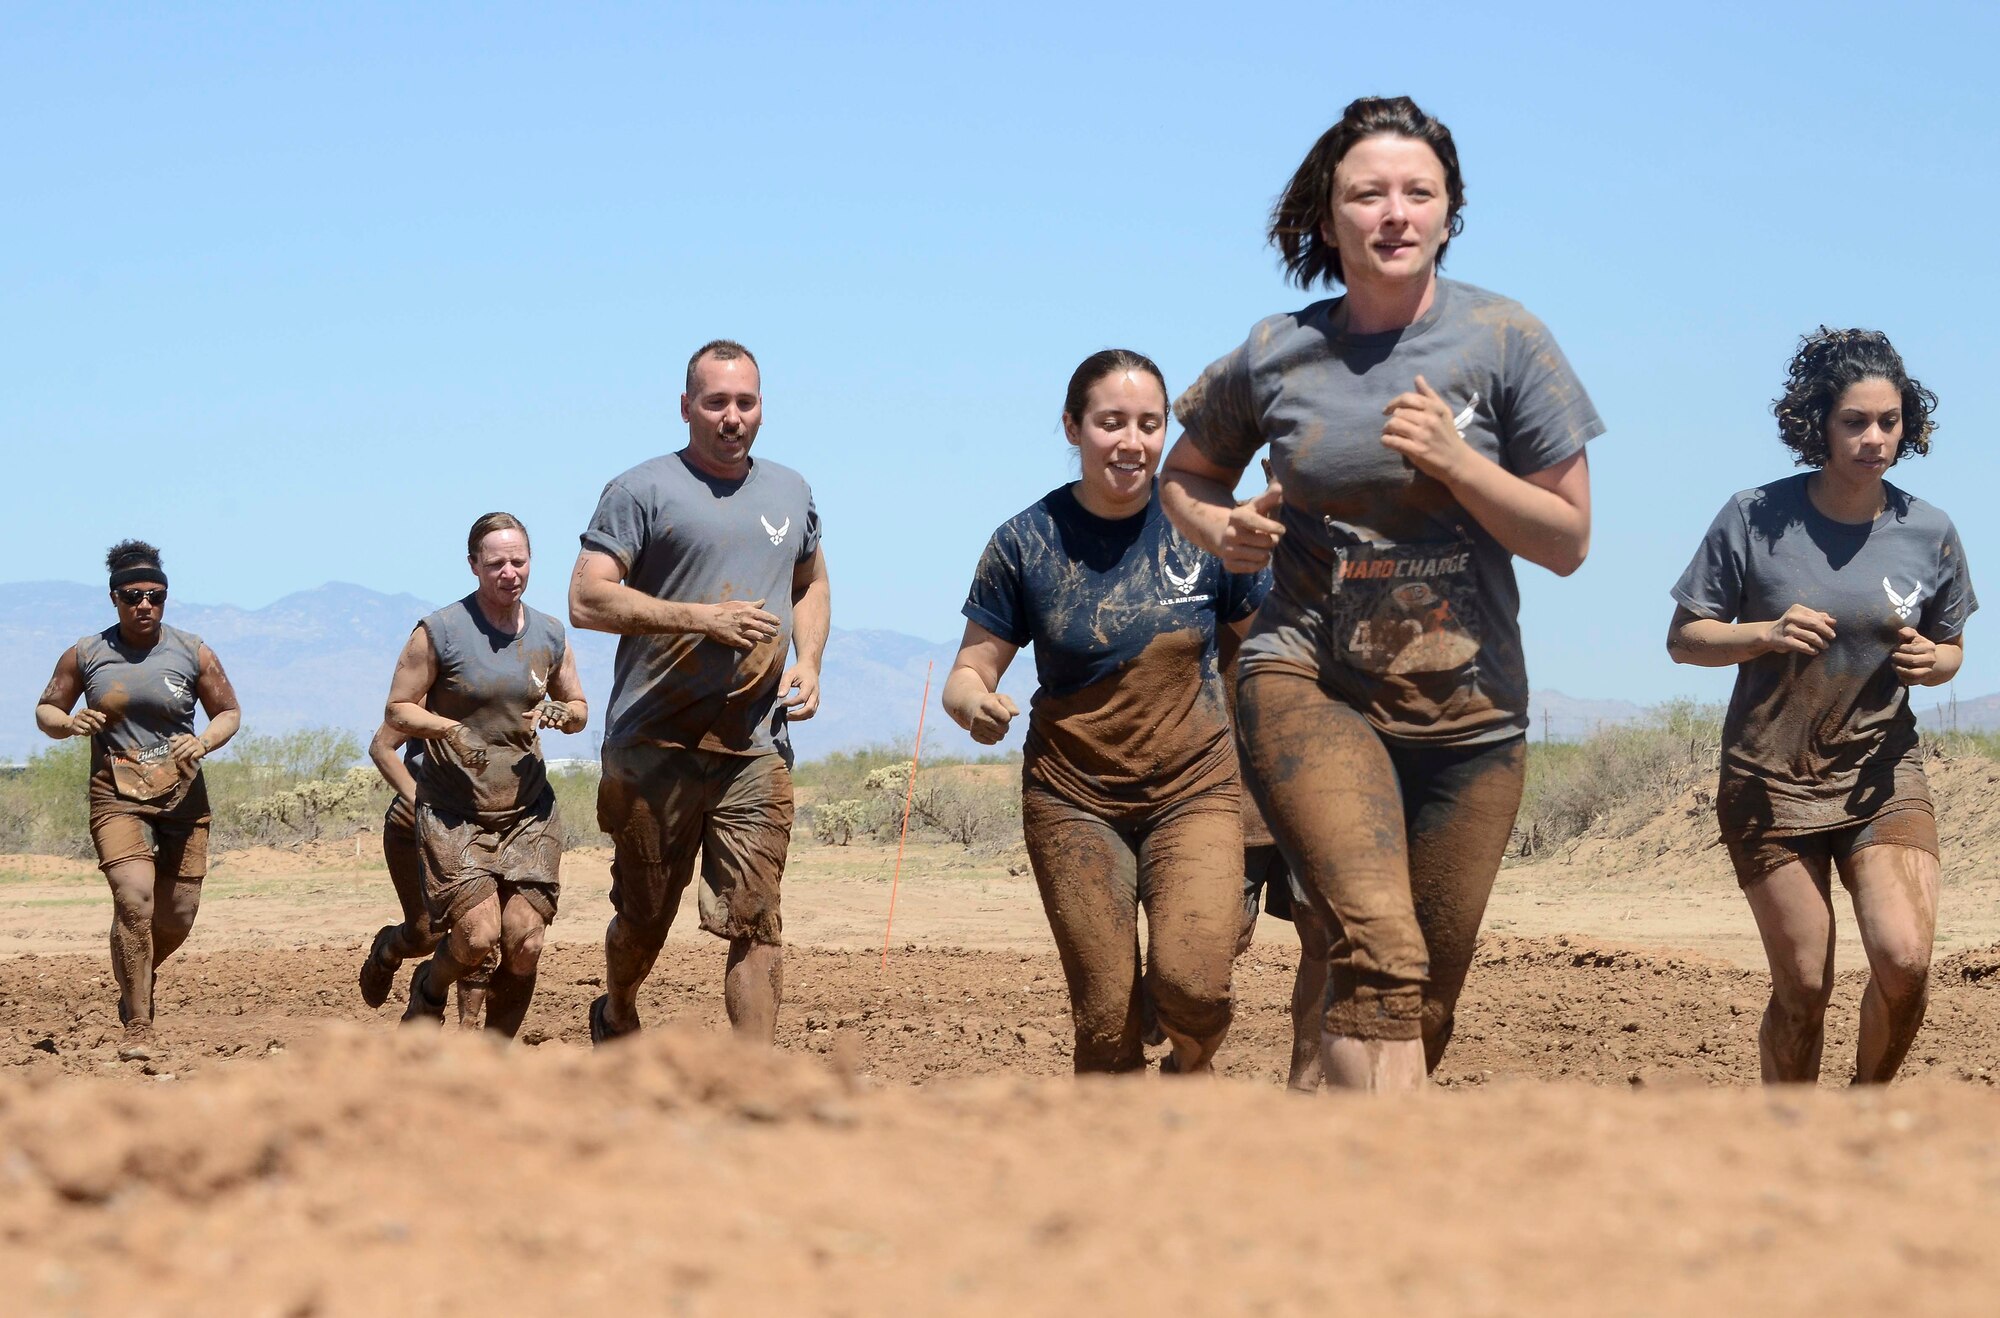 Members from 12th Air Force (Air Forces Southern) jog to their next obstacle during the Hard Charge Televised Obstacle Mission at the Pima County Fairgrounds in Tucson, Ariz., on March 29. The team of 11 members completed the four mile course with of obstacles designed to utilize a mix of strength, stamina, balance, and body awareness  that pushed participants to both mental and physical fatigue. (U.S. Air Force photo by Staff Sgt. Adam Grant/Released)